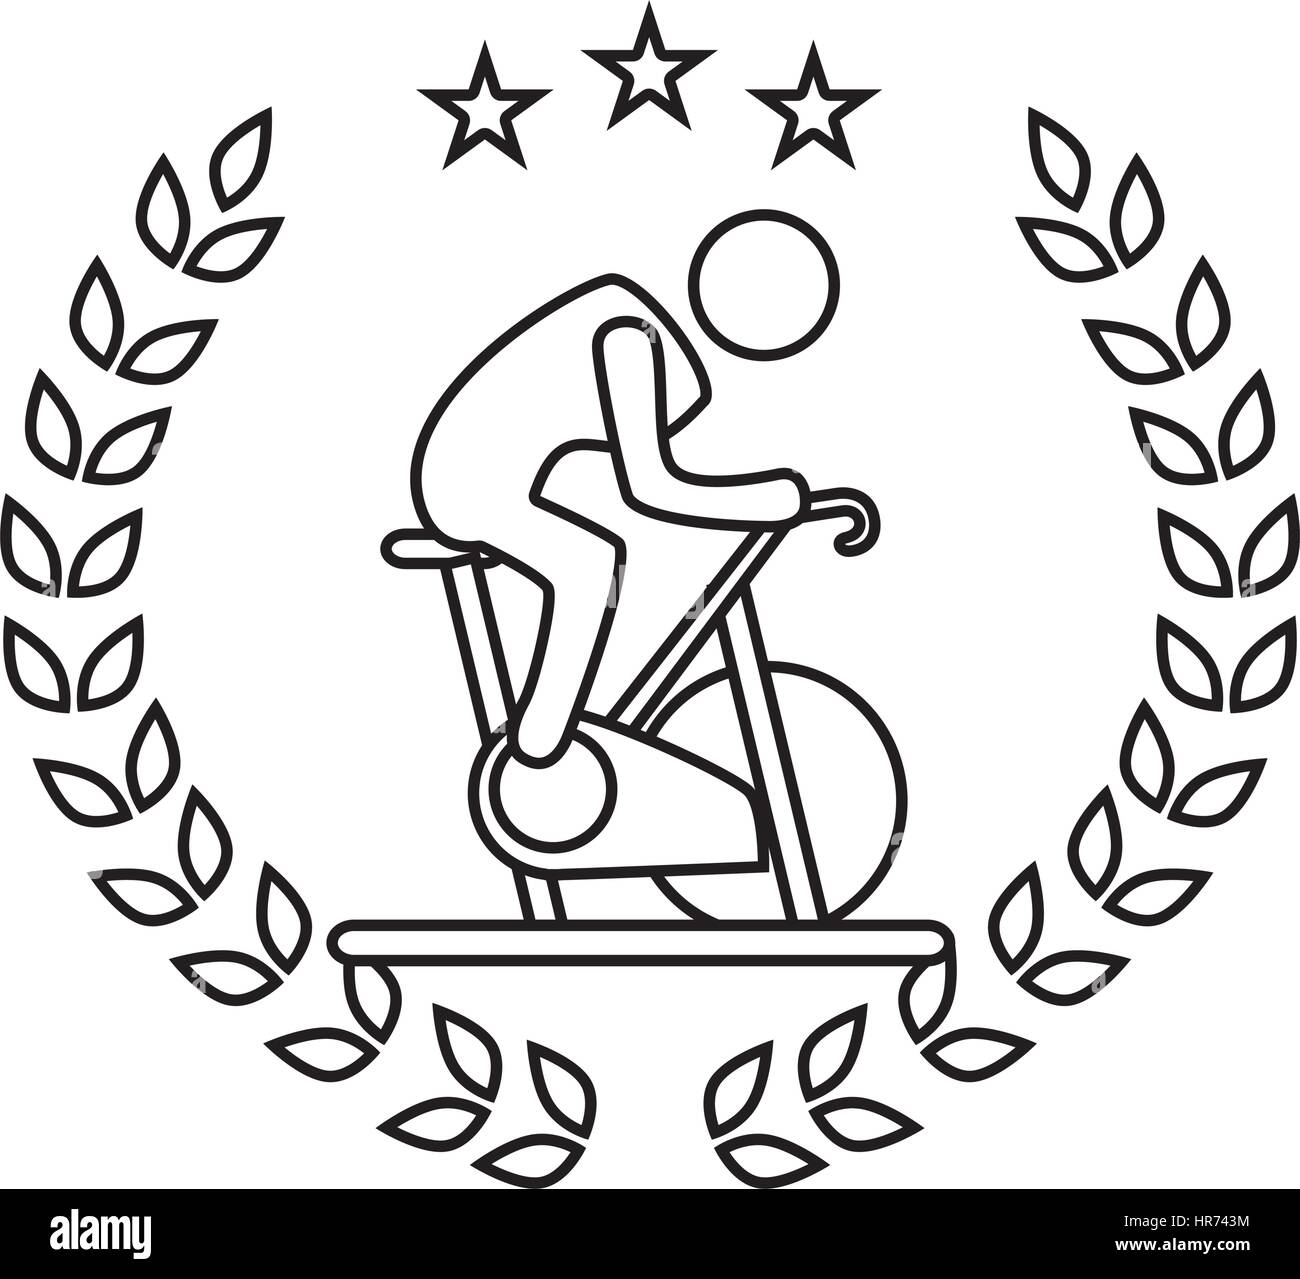 silhouette crown of leaves with pictogram man in spinning bike Stock Vector